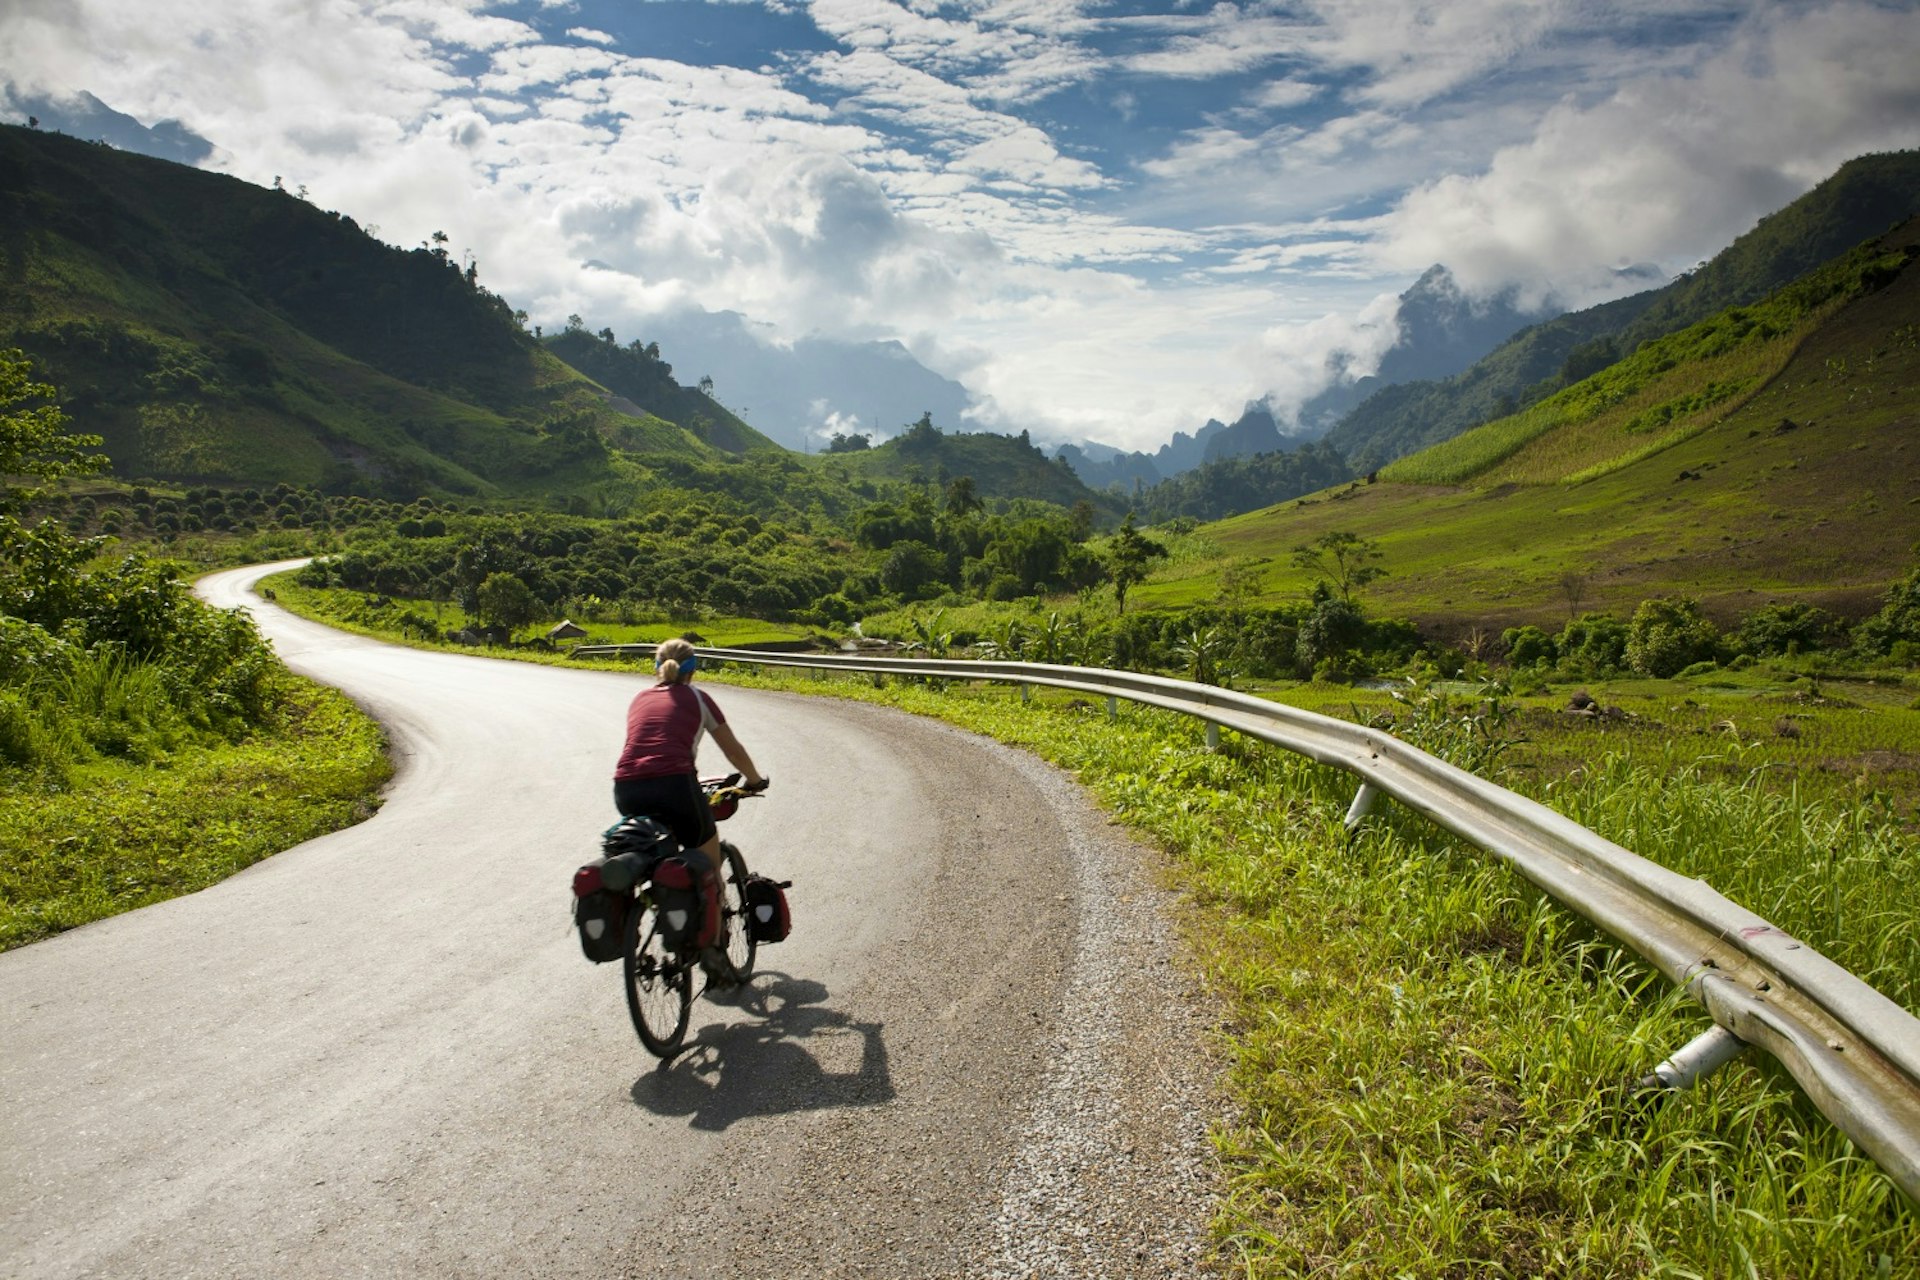 Cycling the Laos countryside